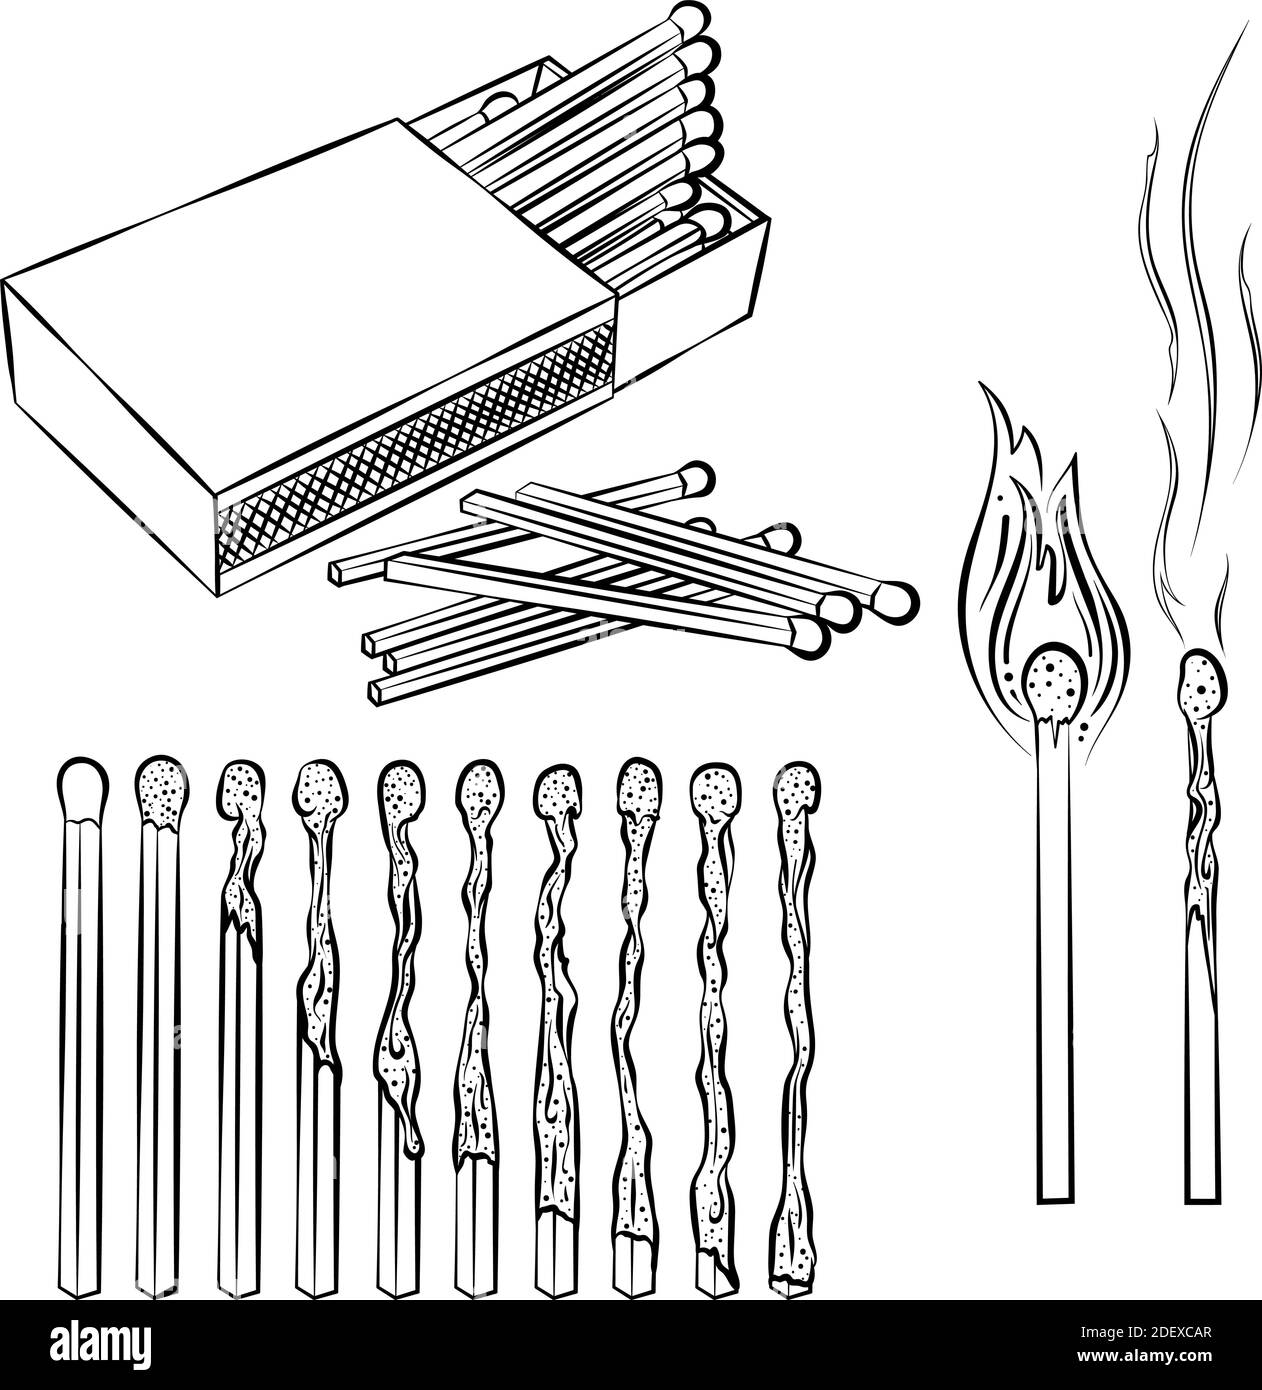 Set of matches. Burning match with fire, burnt matchstick, opened match box. Hand drawn vector illustration with black outline isolated on white background. Elements for coloring book, icon and logo. Stock Vector